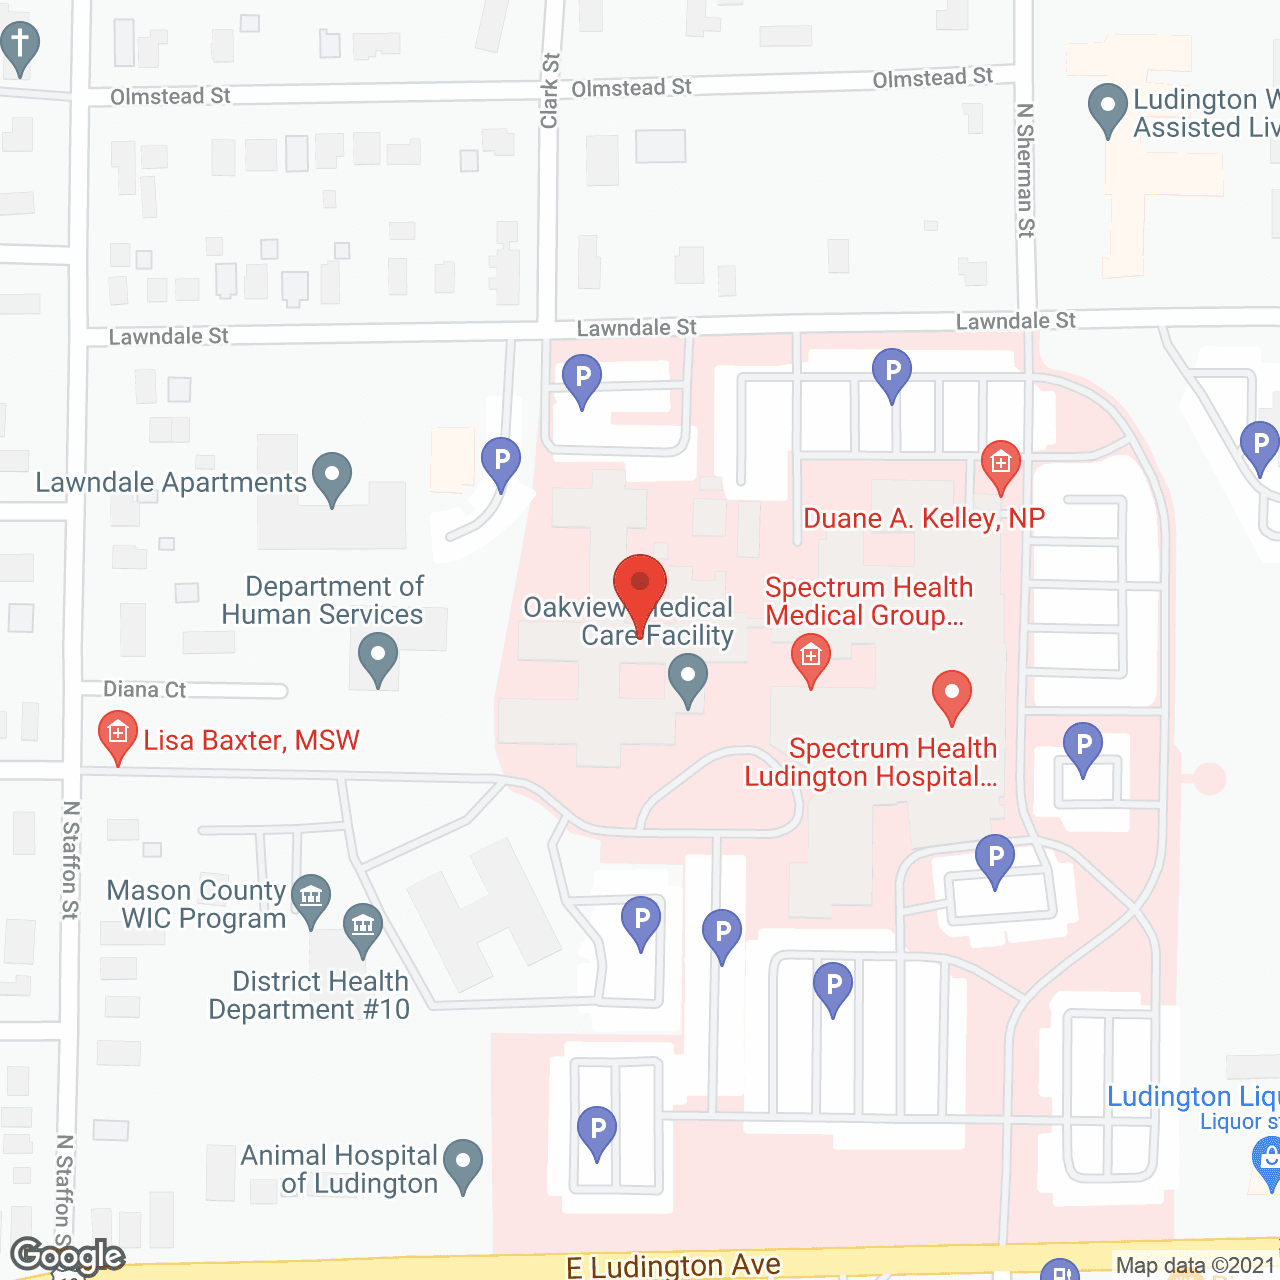 Oakview Medical Care Facility in google map